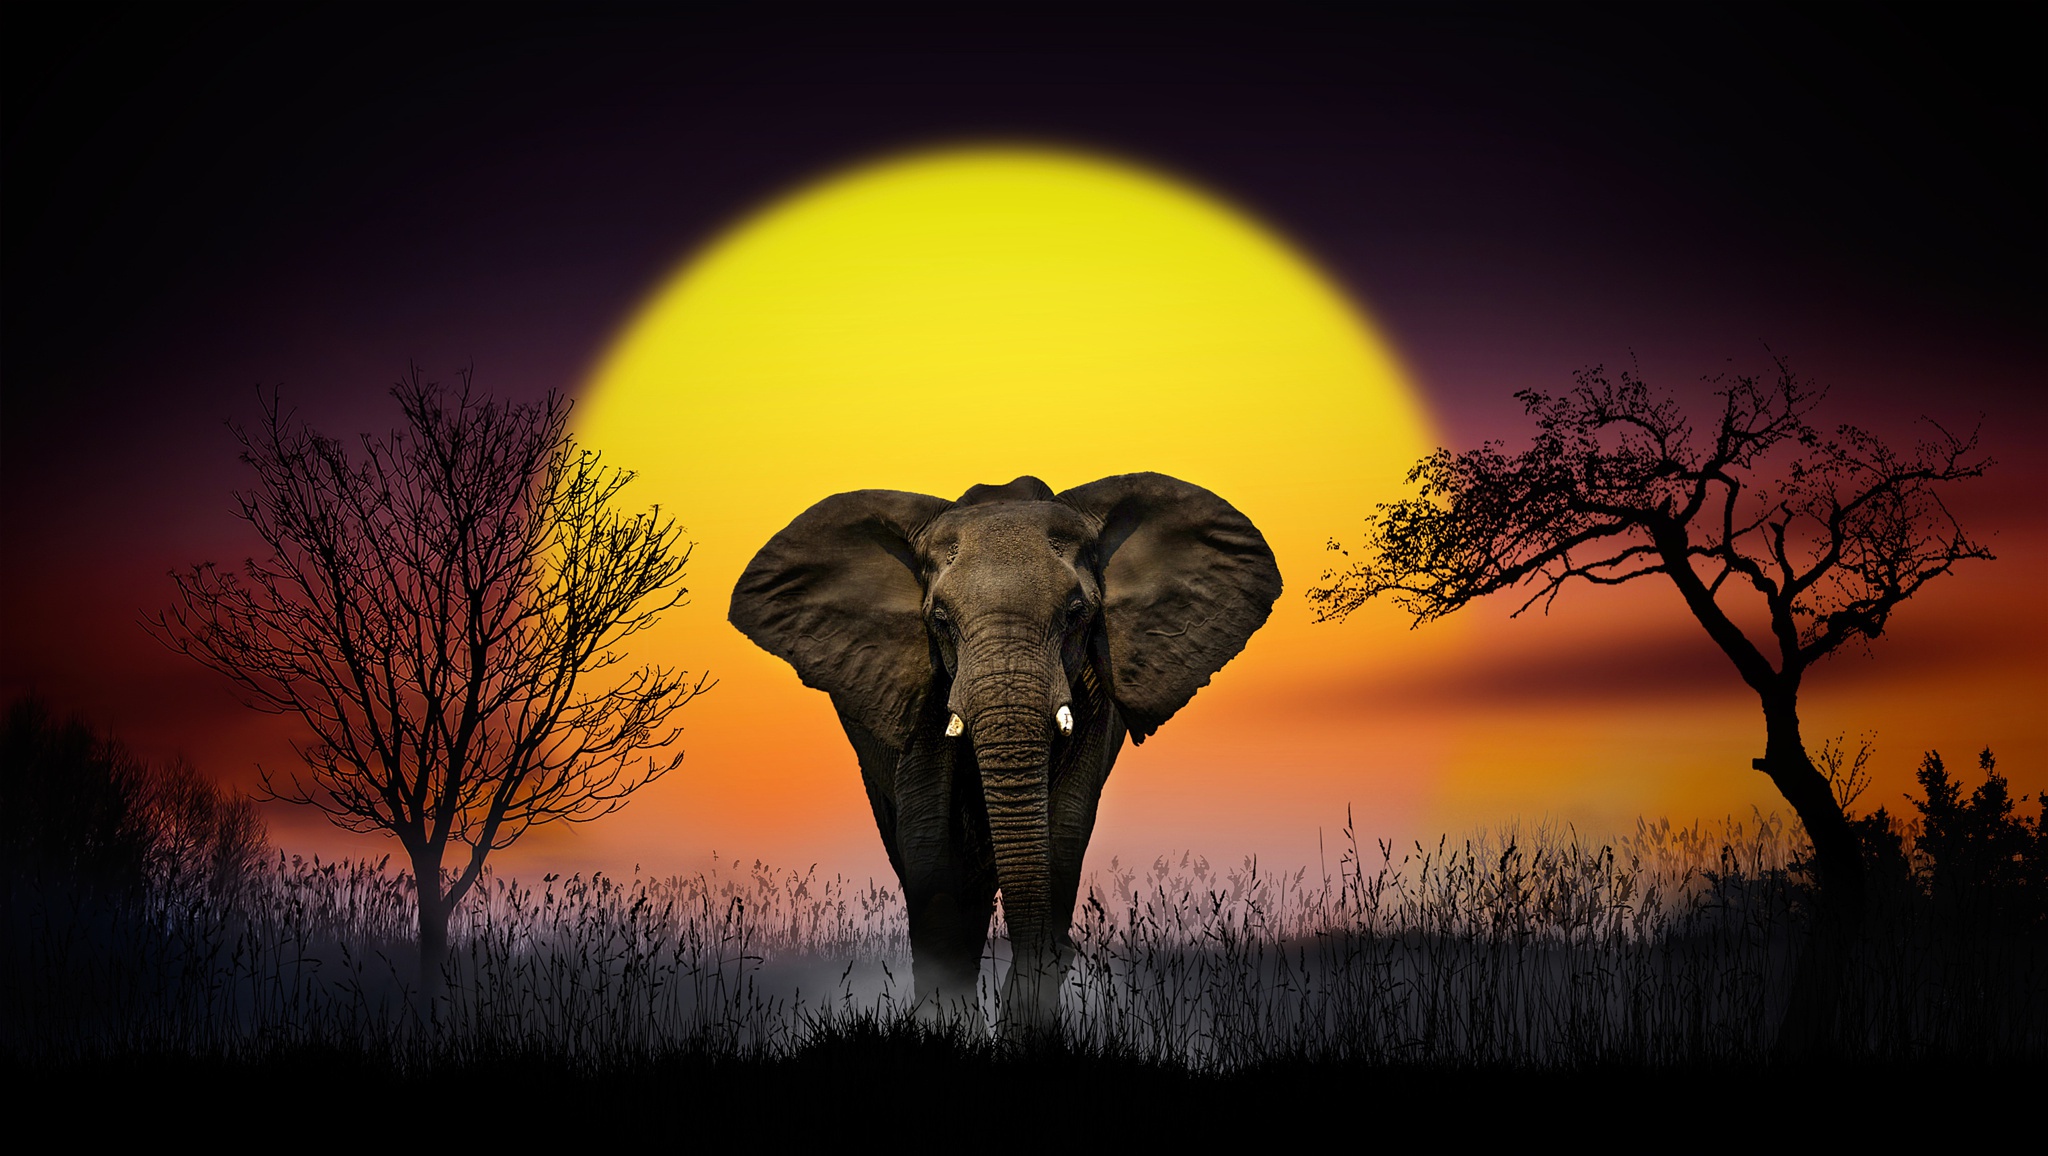 Elephant full hd hdtv fhd 1080p wallpapers hd desktop backgrounds  1920x1080 images and pictures